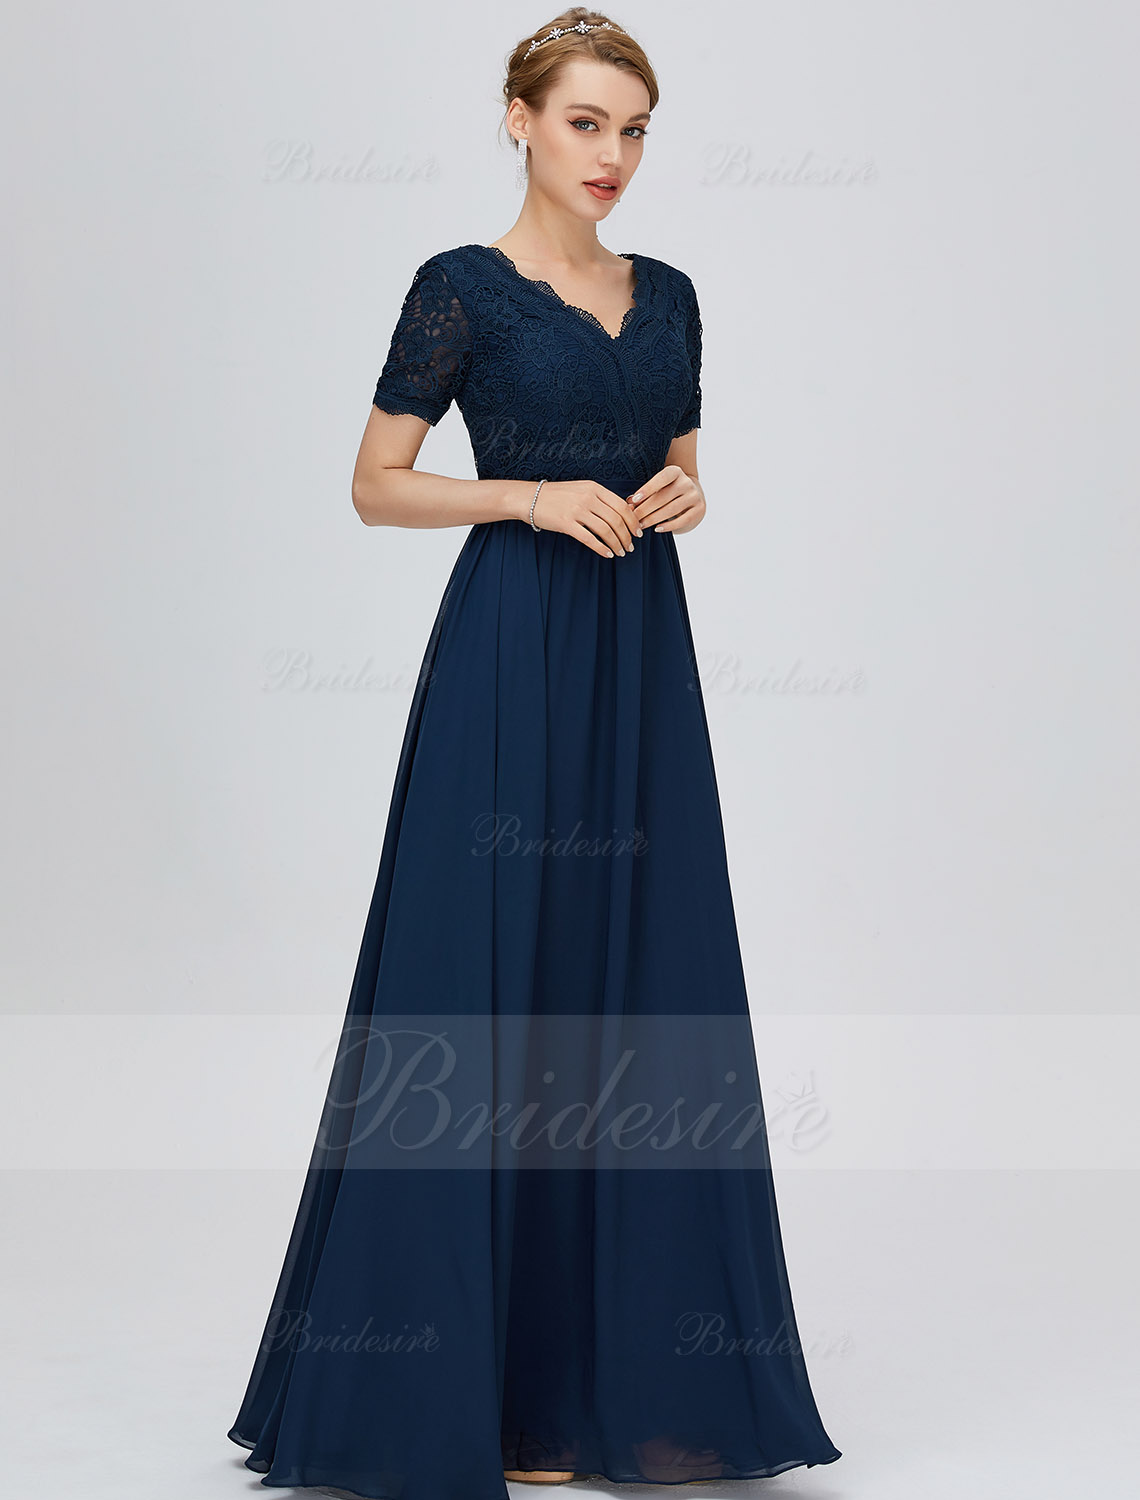 A-line V-neck Floor-length Short Sleeve Chiffon Prom Dress with Lace